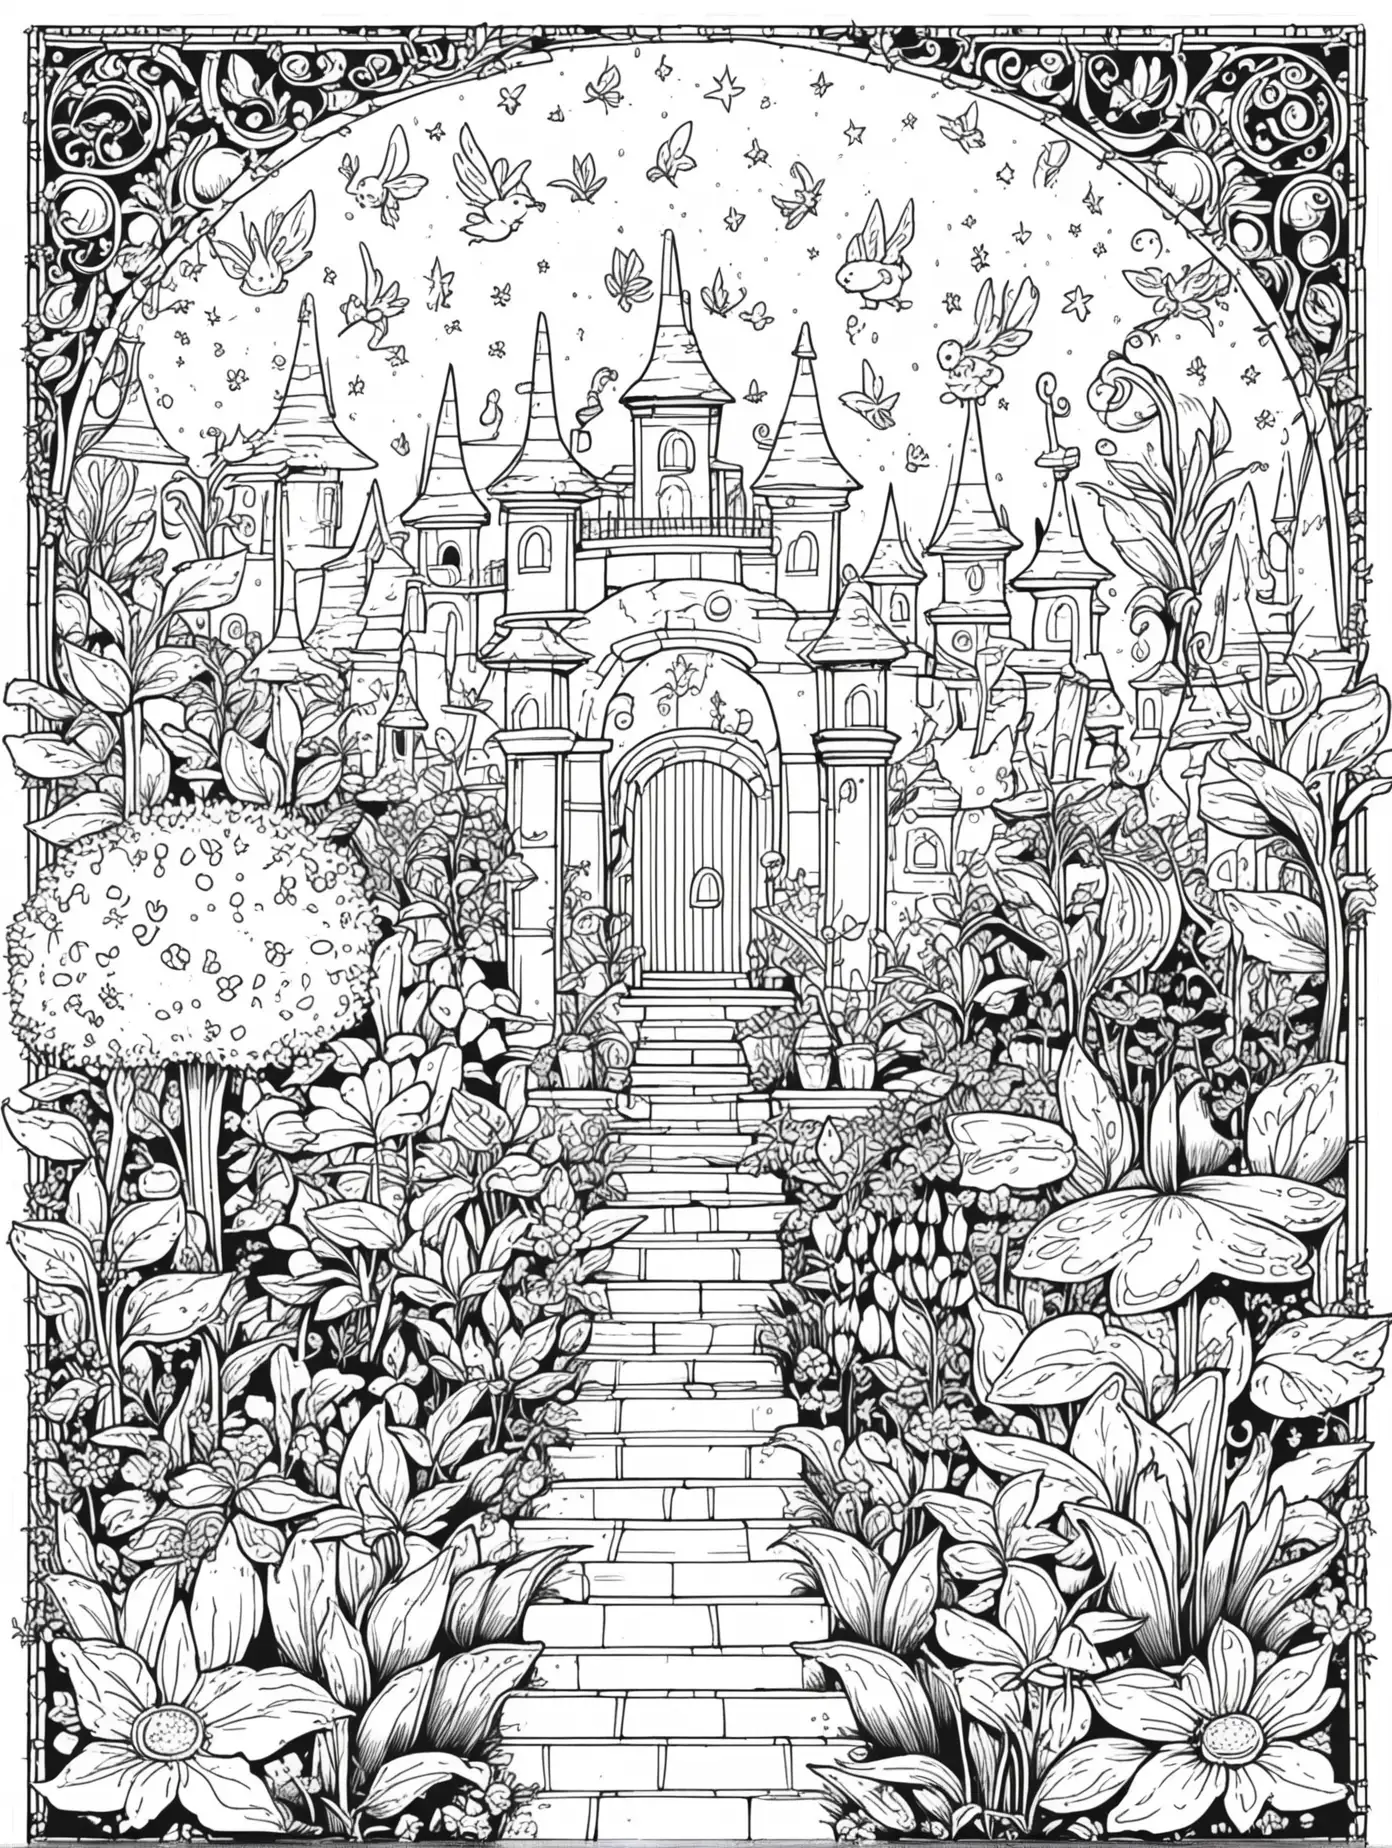 Enchanting Fantasy Garden Coloring Page with Cartoon Style Thin Lines